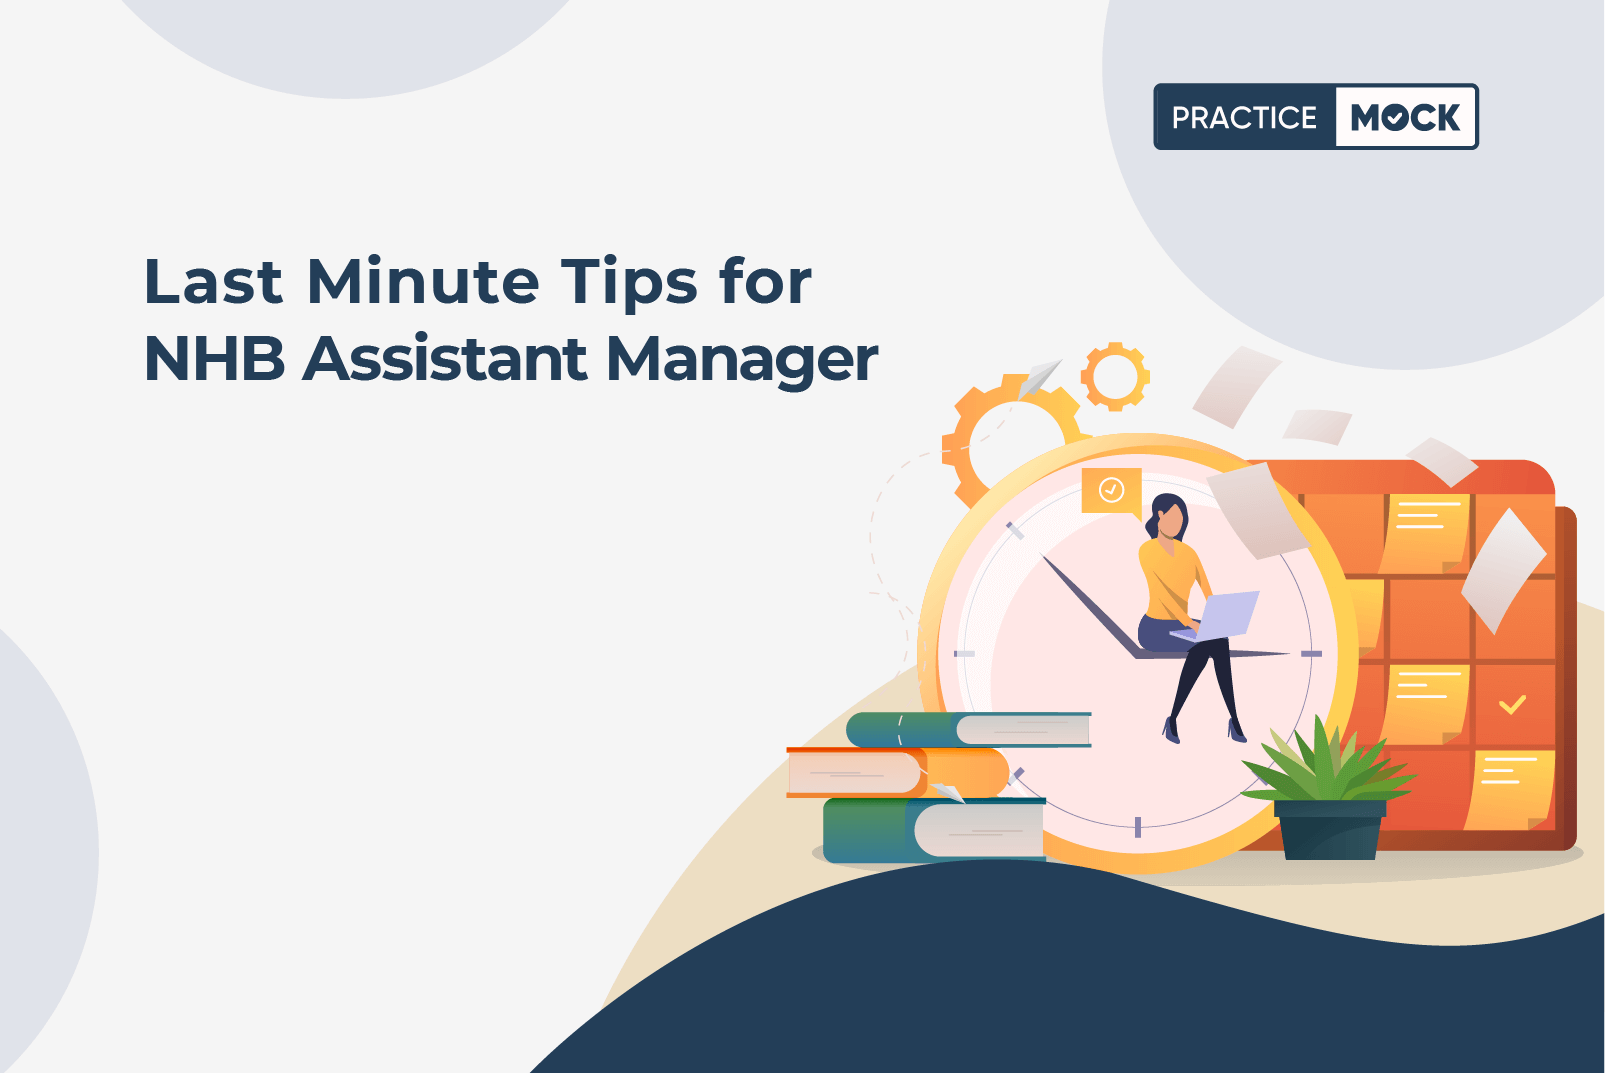 Last Minute Tips for NHB Assistant Manager